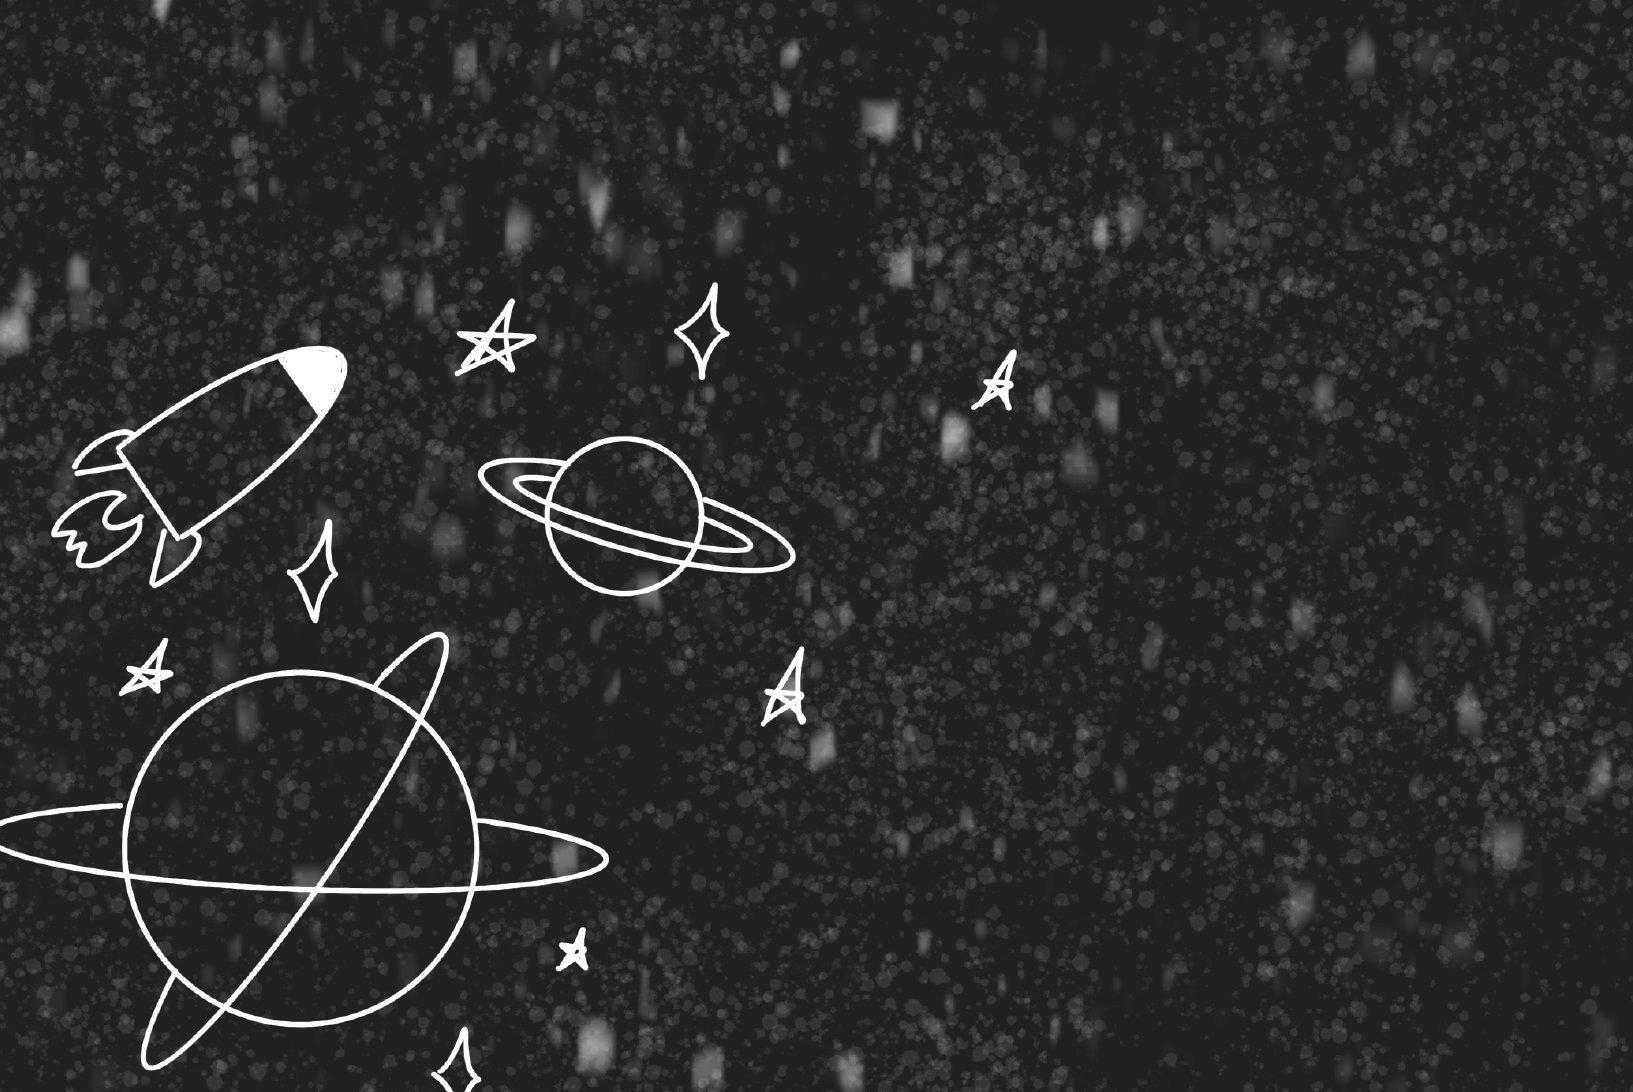 A black and white graphic of a rocket ship, planets, and stars - Space